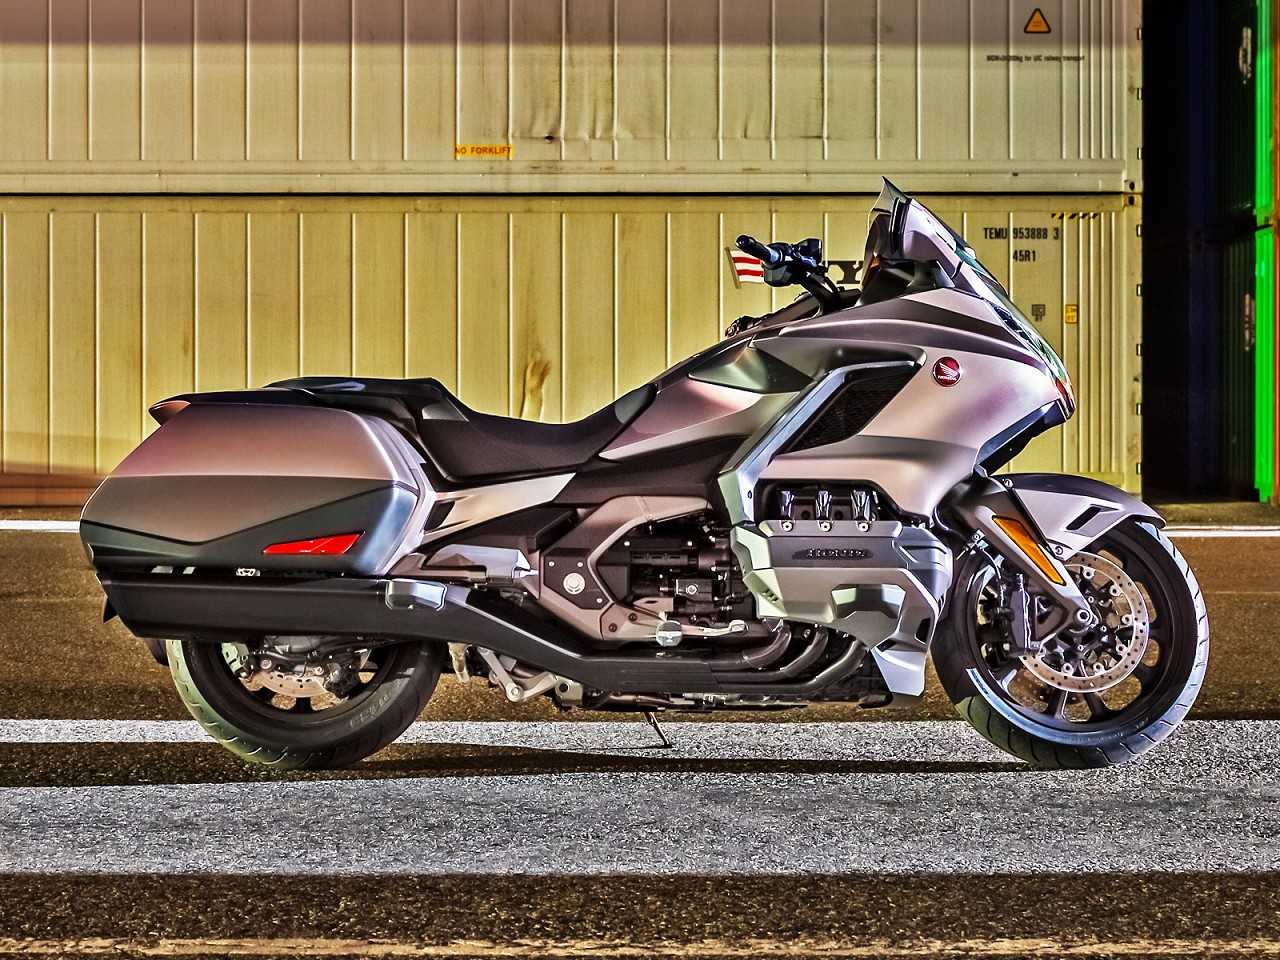 HondaGL 1800 Gold Wing 2019 - lateral